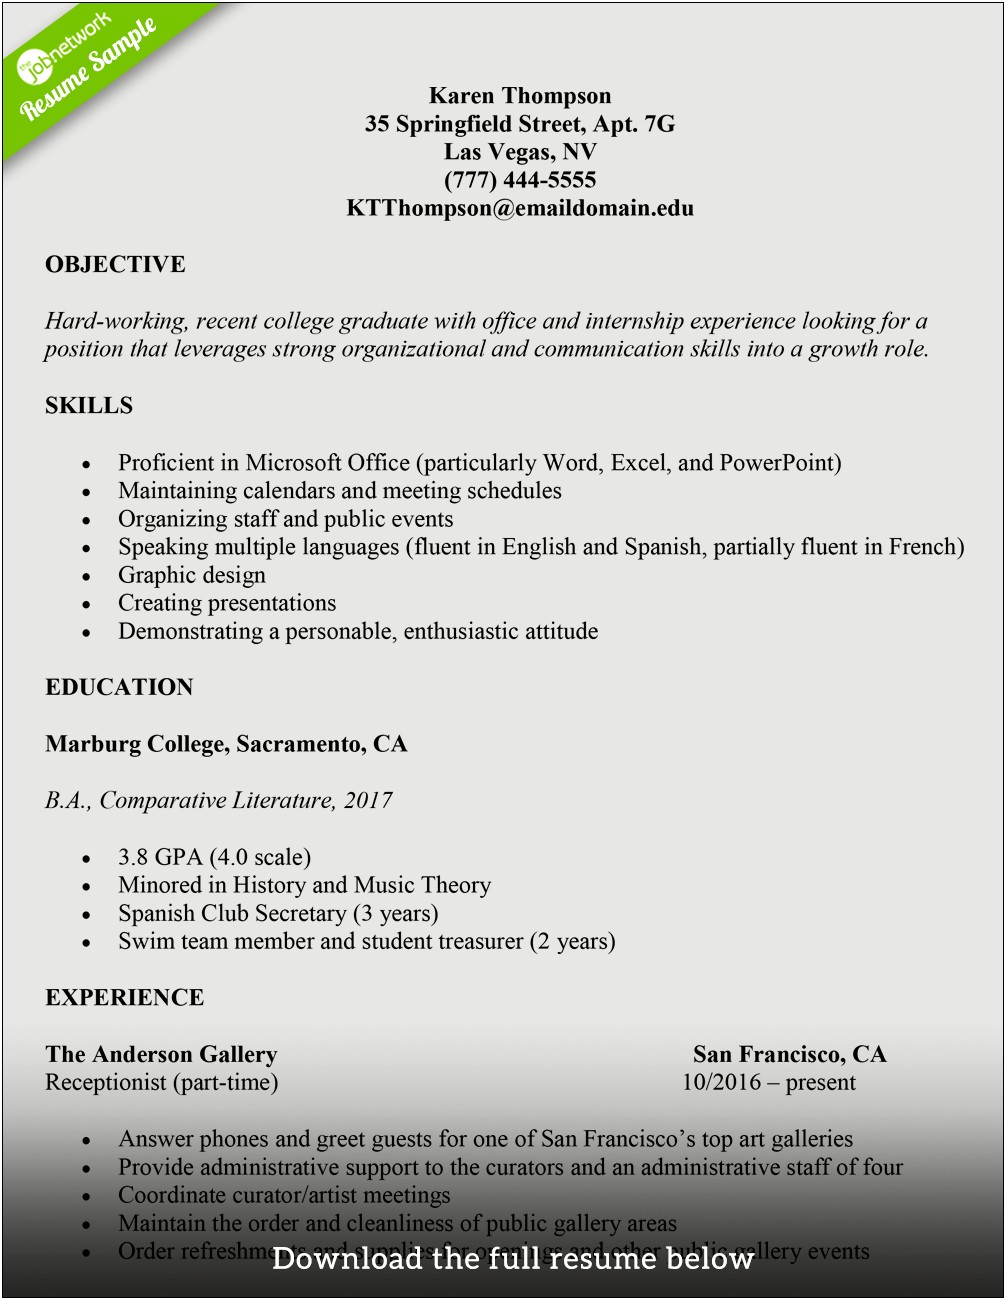 Resume Samples For On Campus Jobs